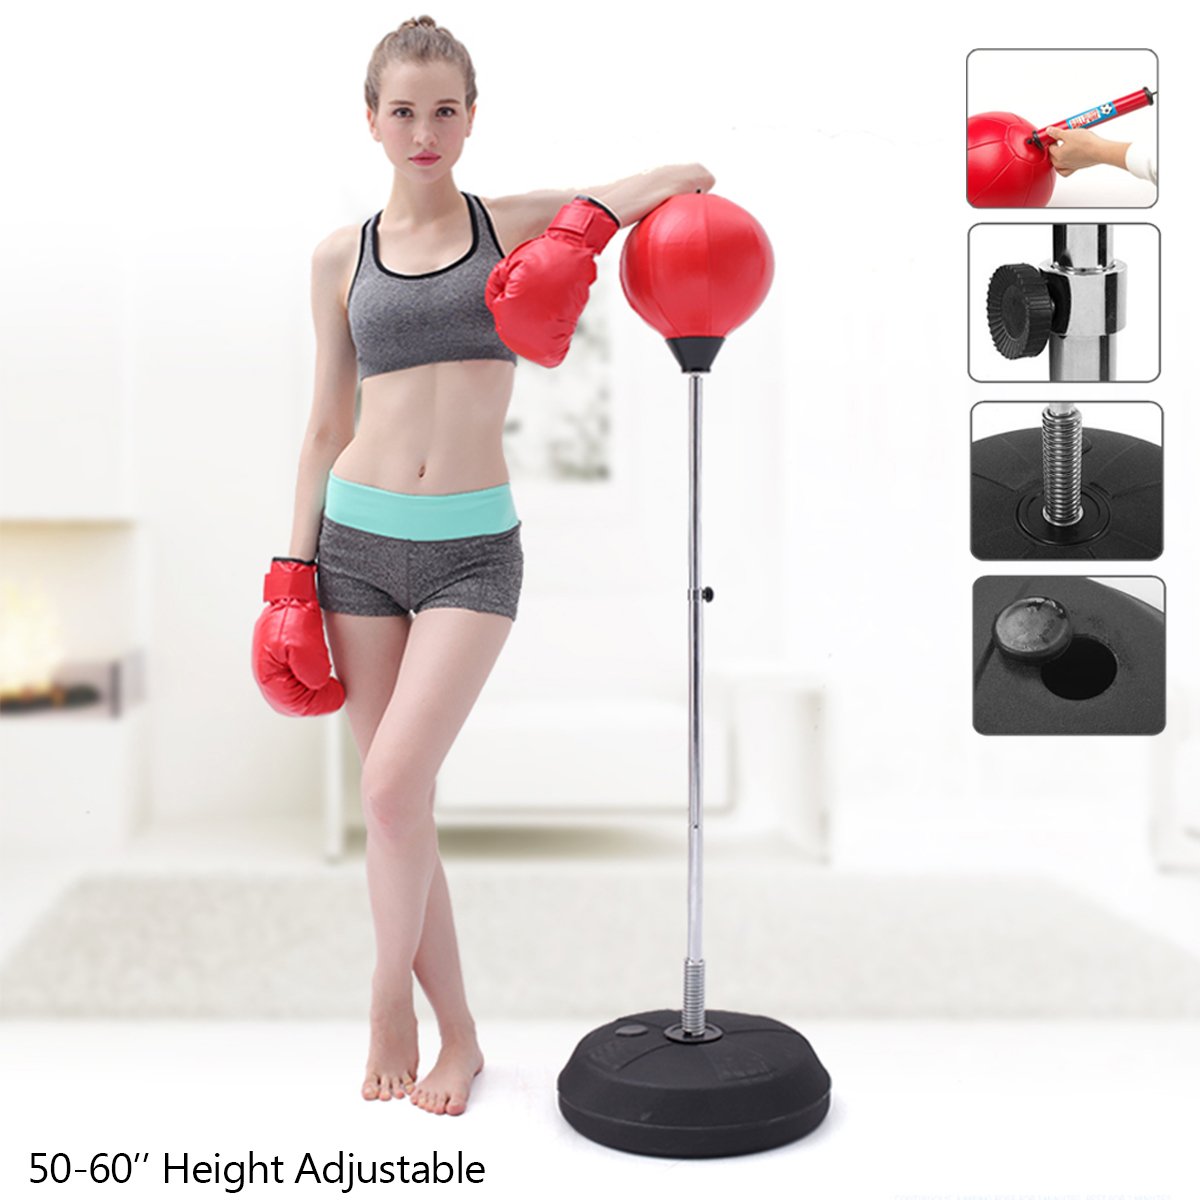 young girl wearing boxing gloves standing beside red inflatable freestanding punching bag text 50 60 inches height adjustable